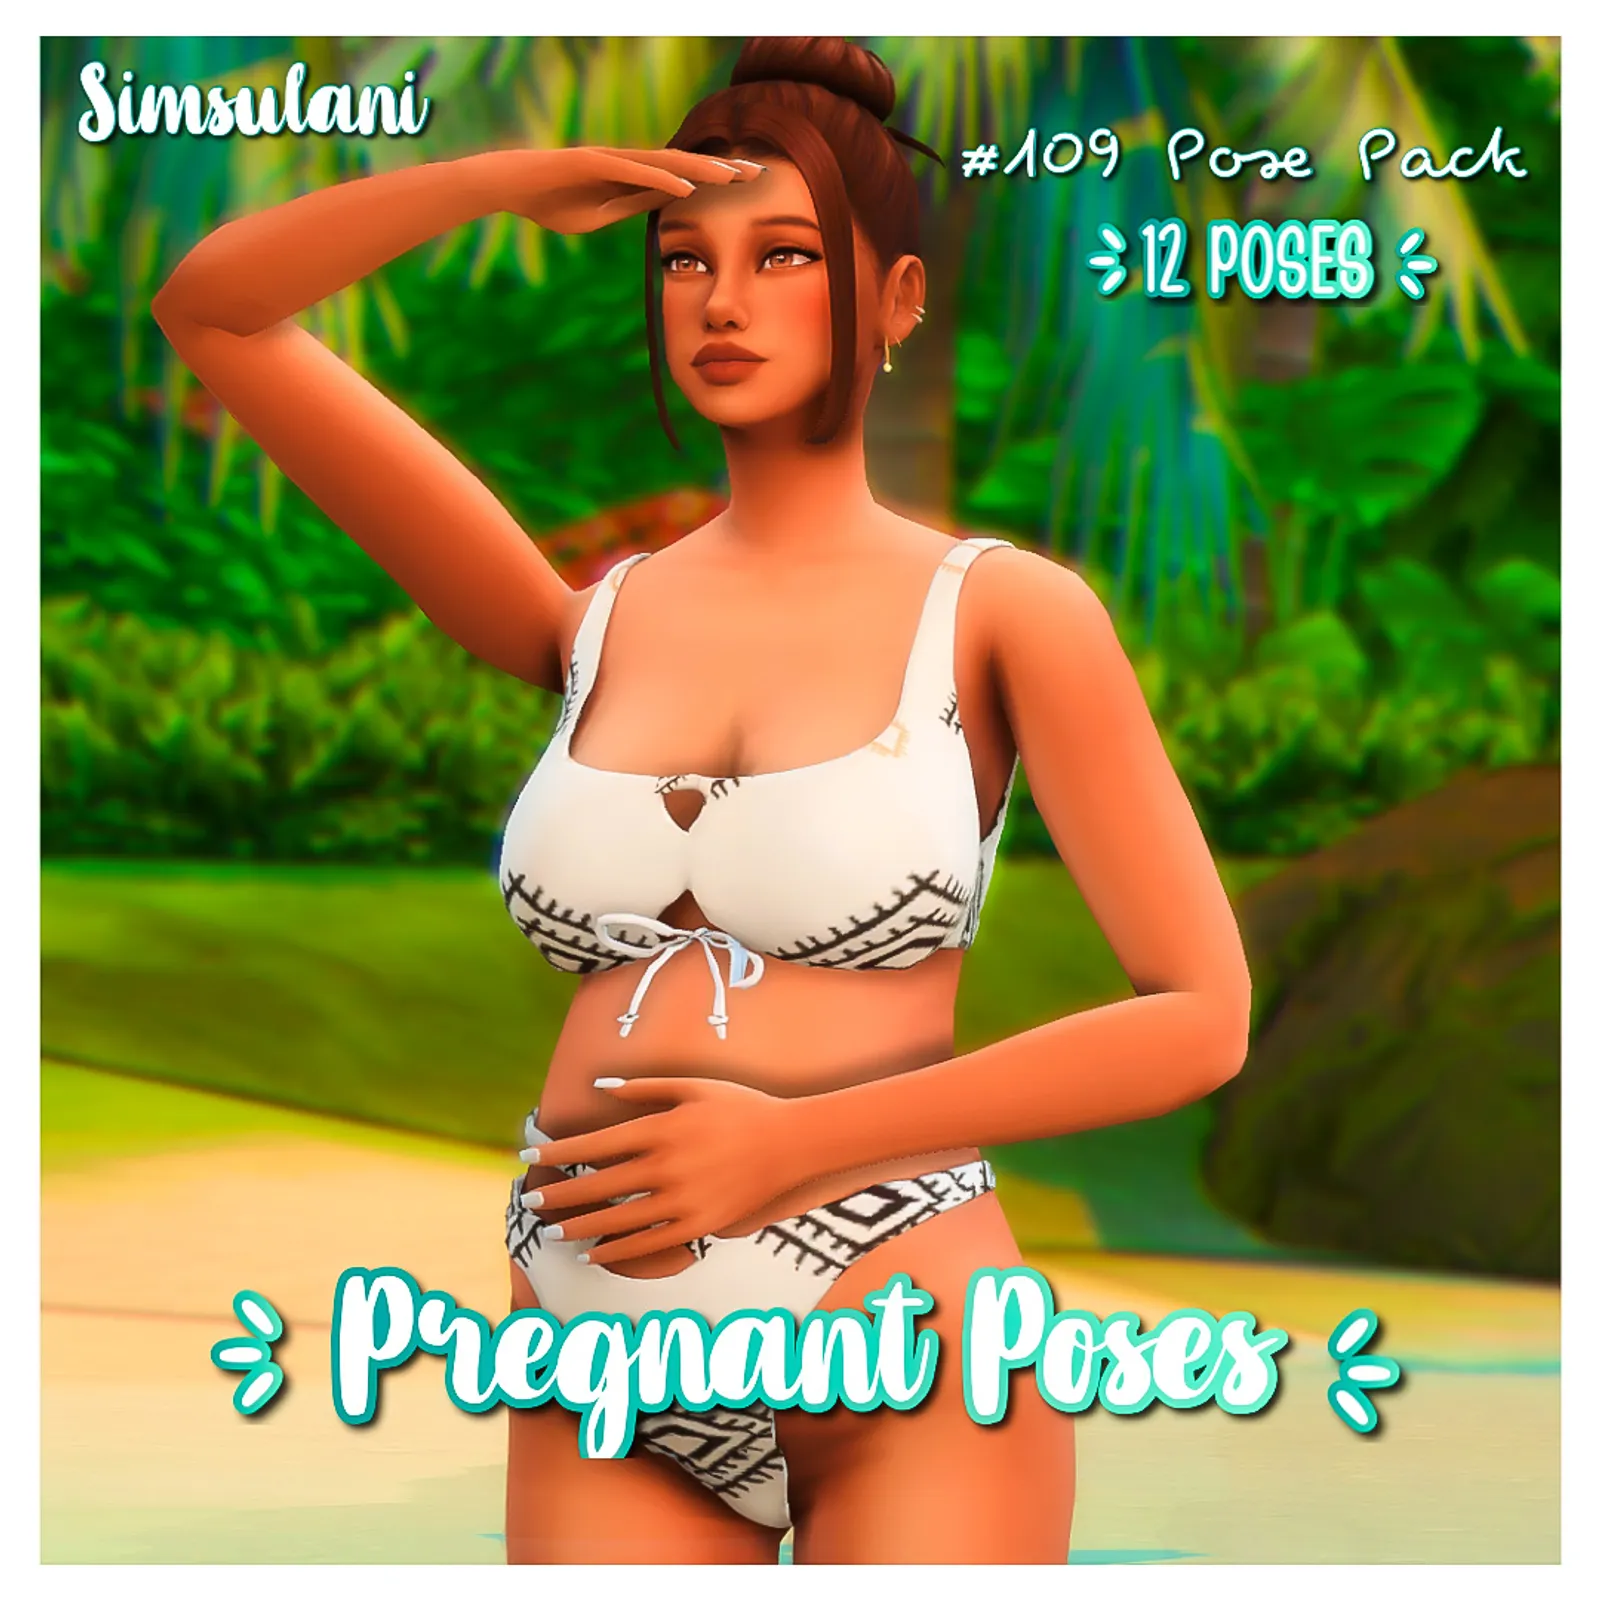 #108 Pose Pack : Pregnant Poses 3rd Trimester